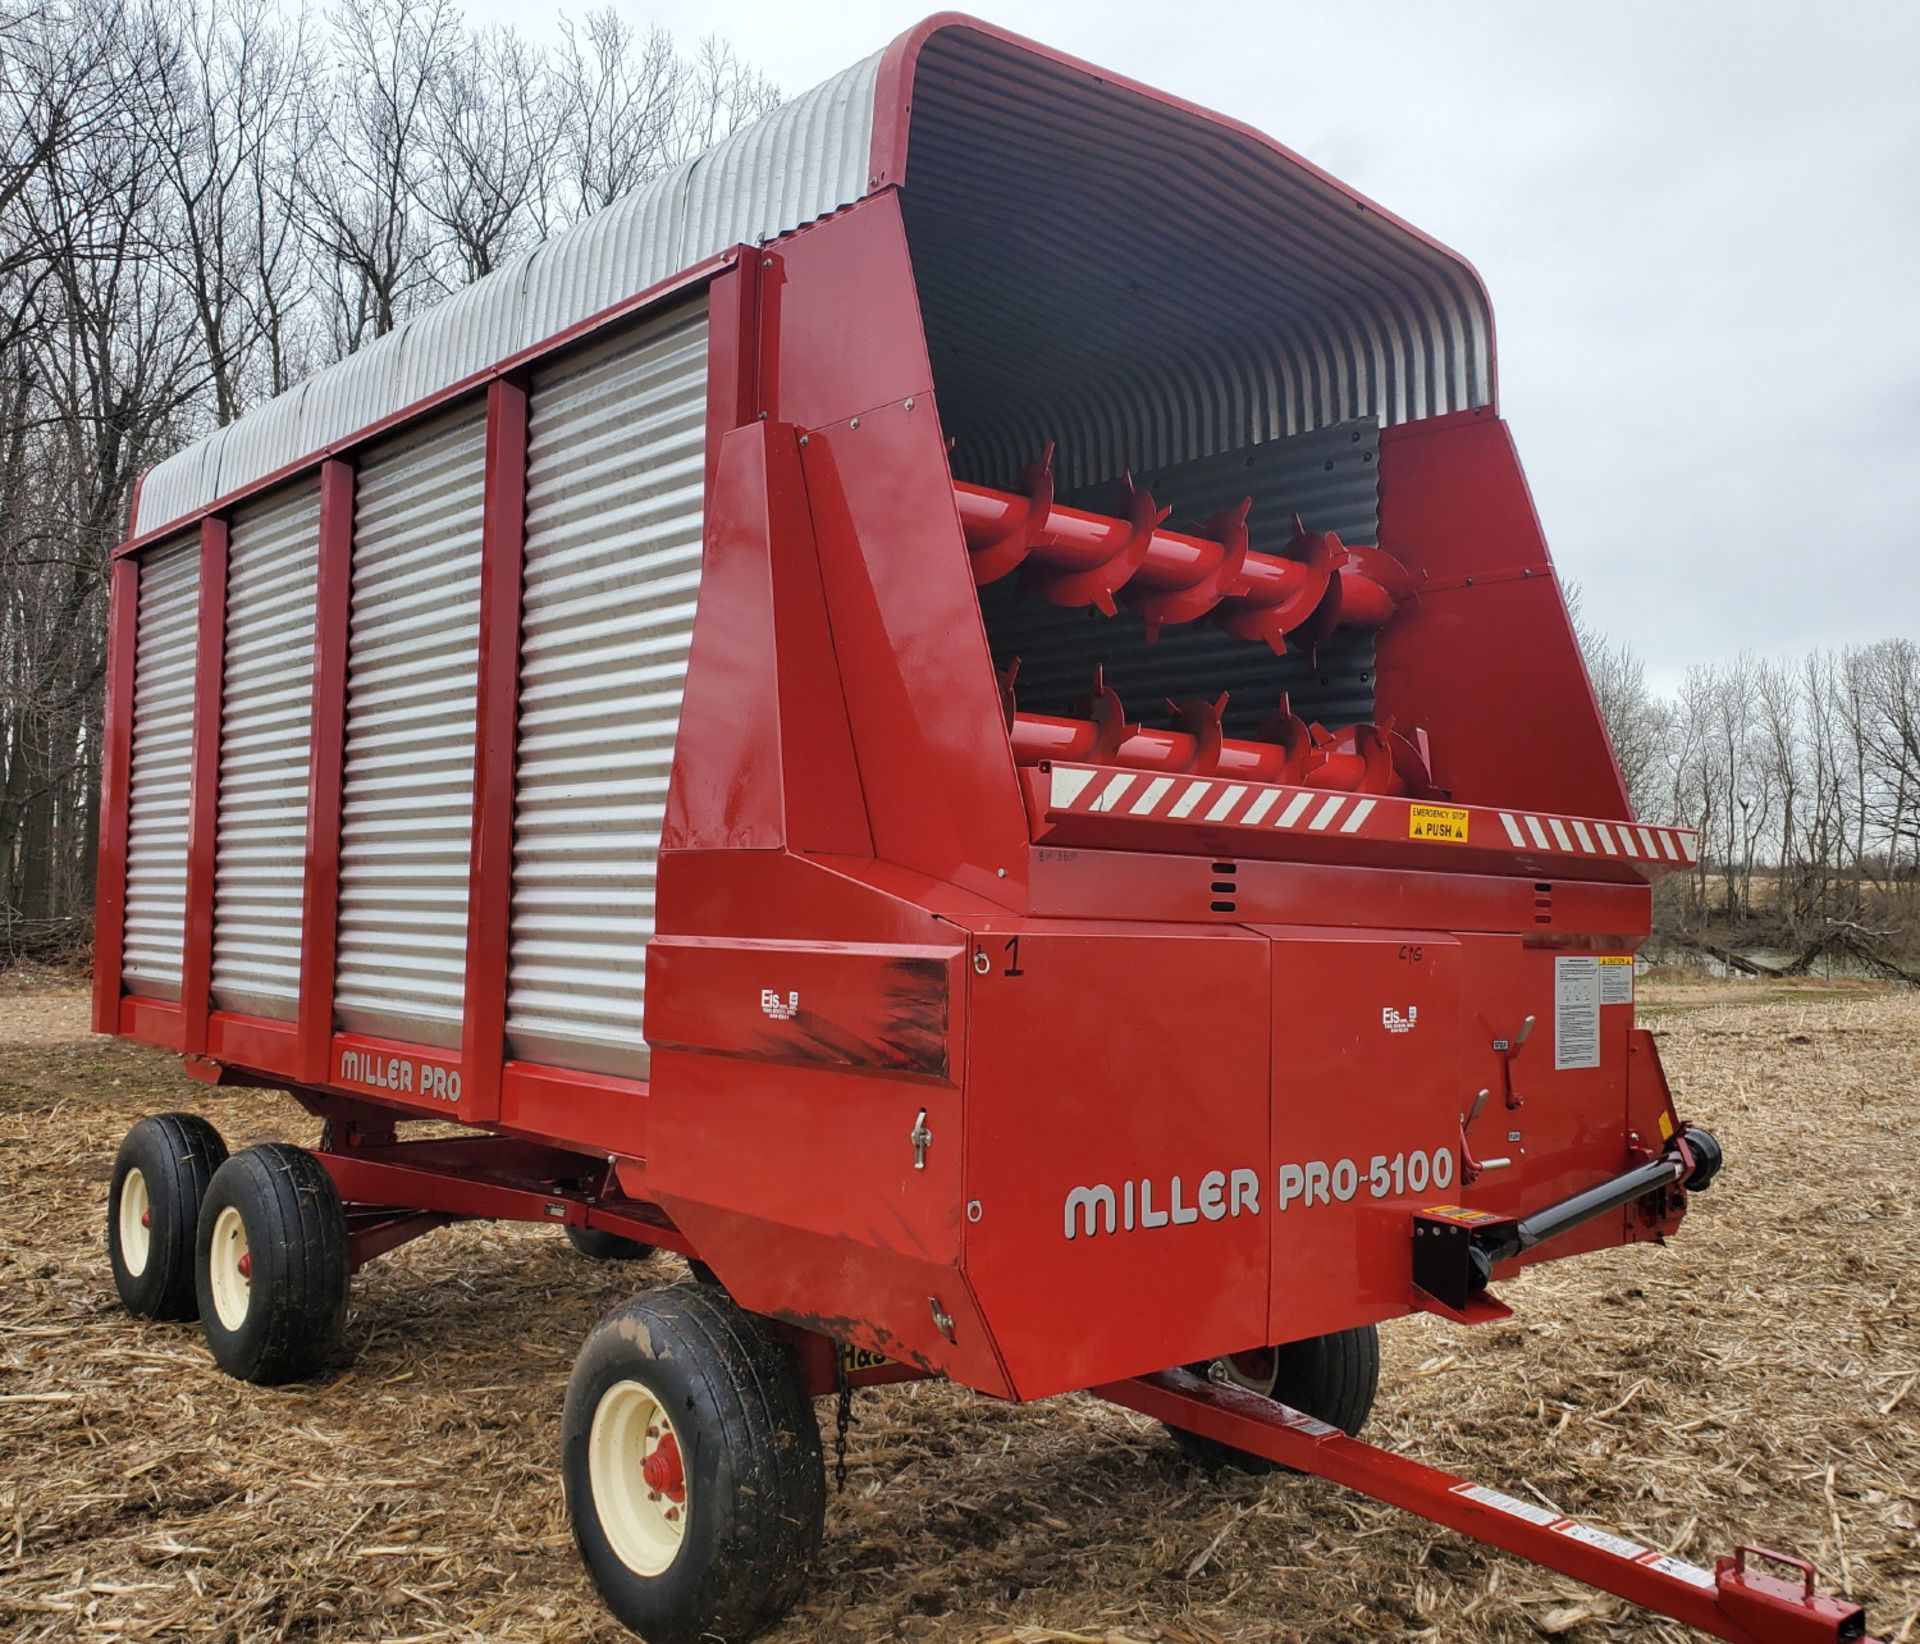 MILLER PRO 5100 16' LH SU FORAGE WAGON (SELLING CHOICE OF 3) - Image 2 of 4